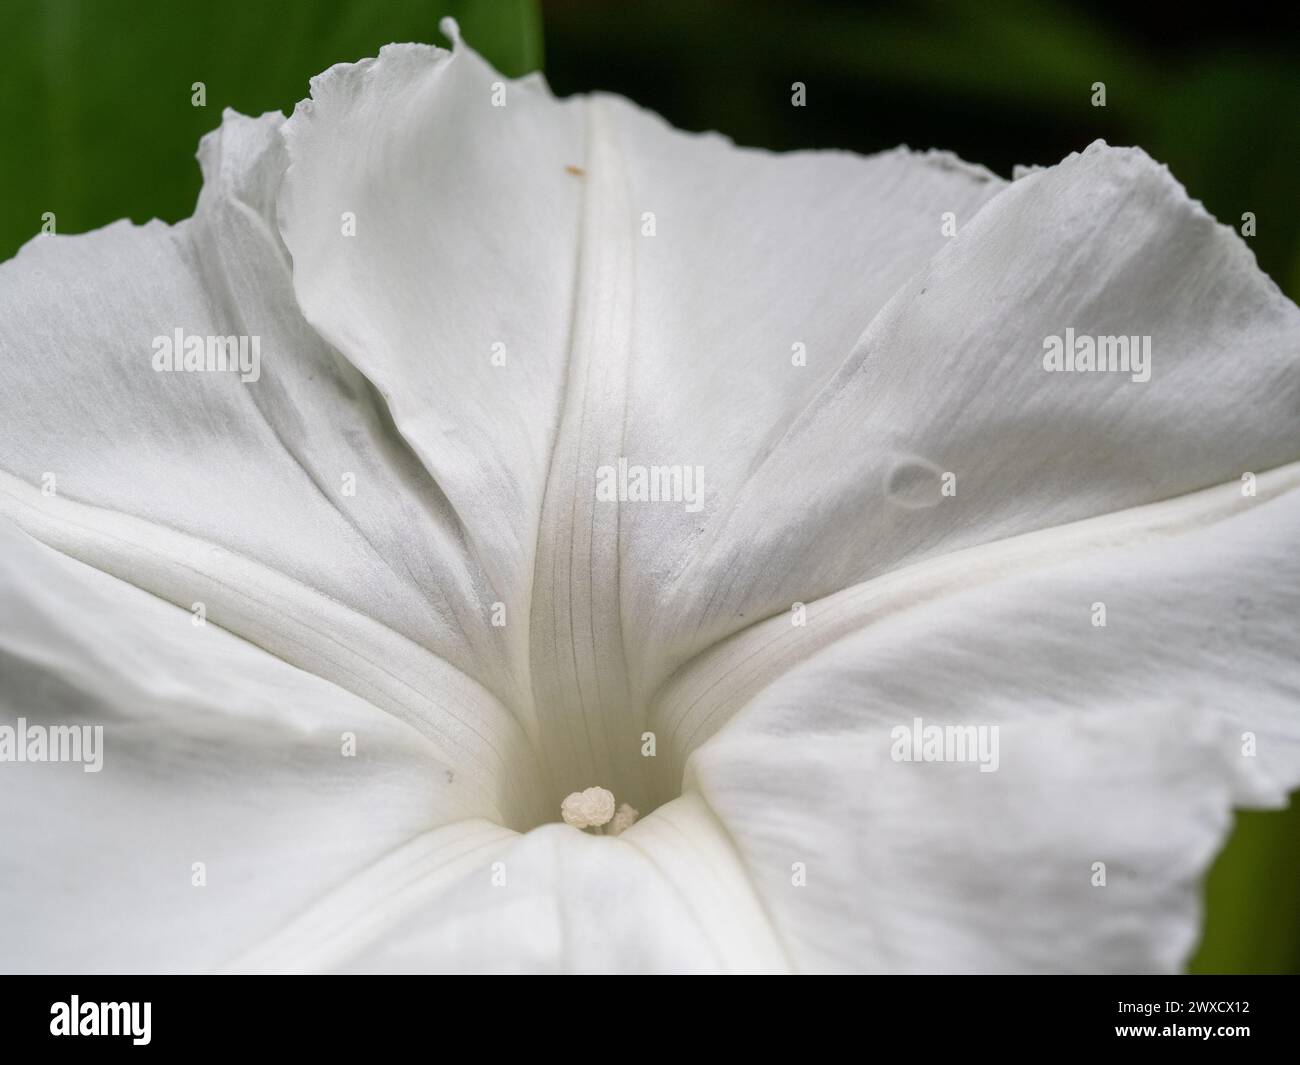 White flower closeup of Kankong aka Water Spinach plant Stock Photo